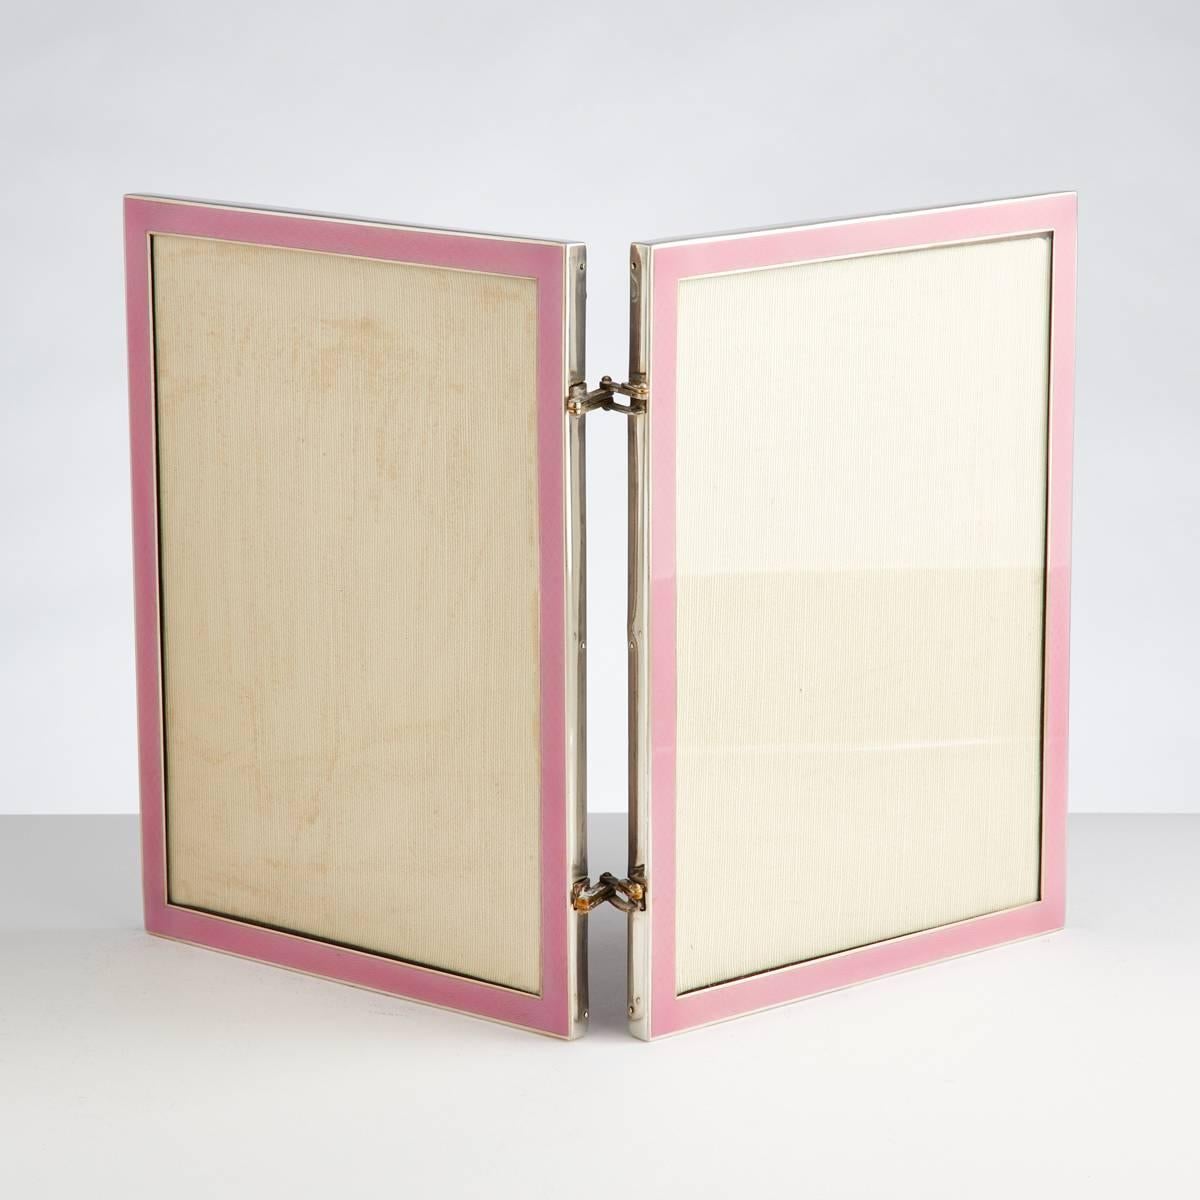 An Art Deco double silver & enamel  photograph frame.
The vibrant pink enamel really sets it apart.
The hinges allow the frame to be opened in two directions.
The silver is dated Birmingham 1927 by maker Samson Mordent.
It retains its original